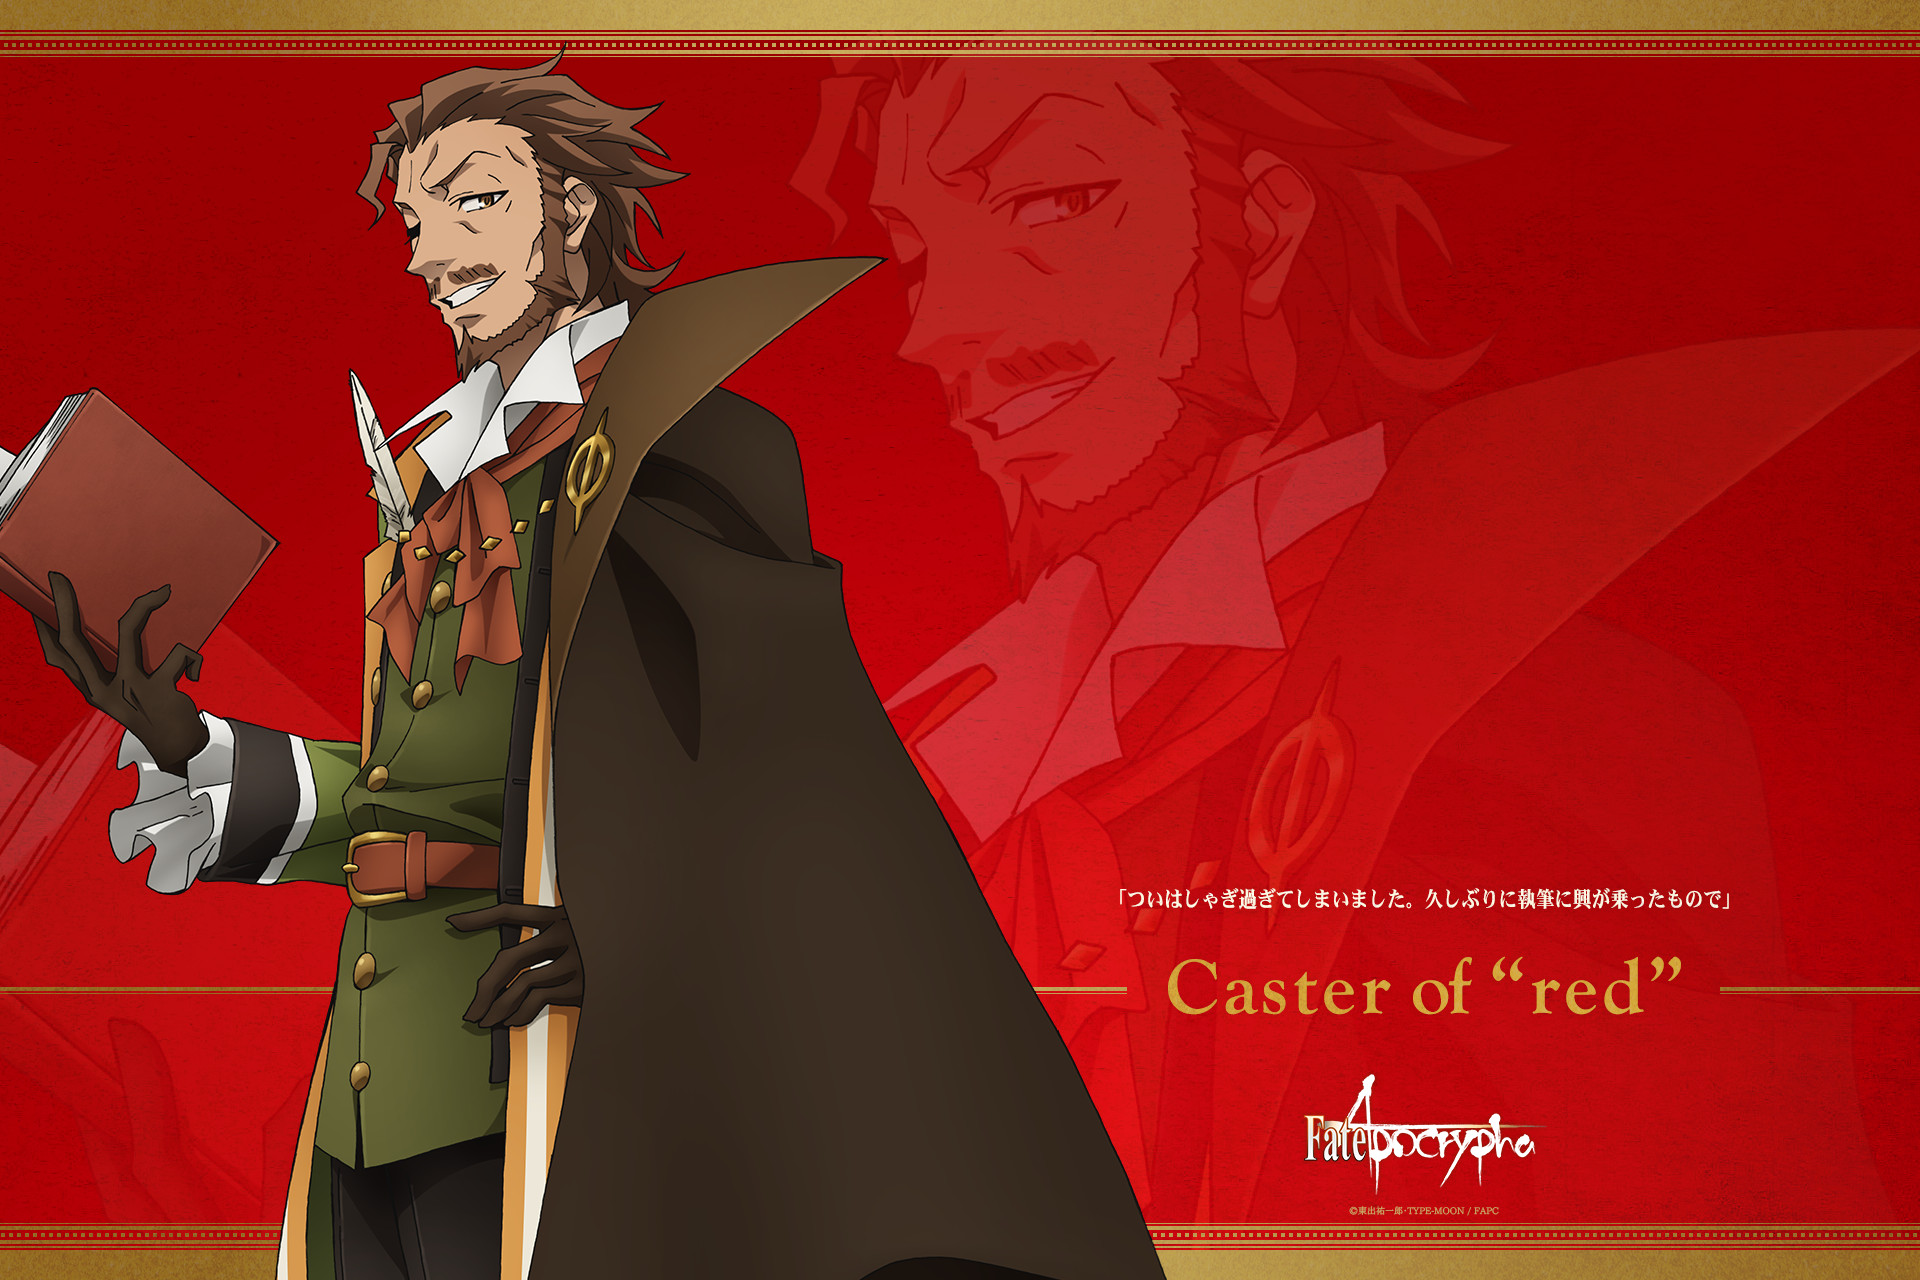 Caster Of Red Fate Apocrypha 1920x1280